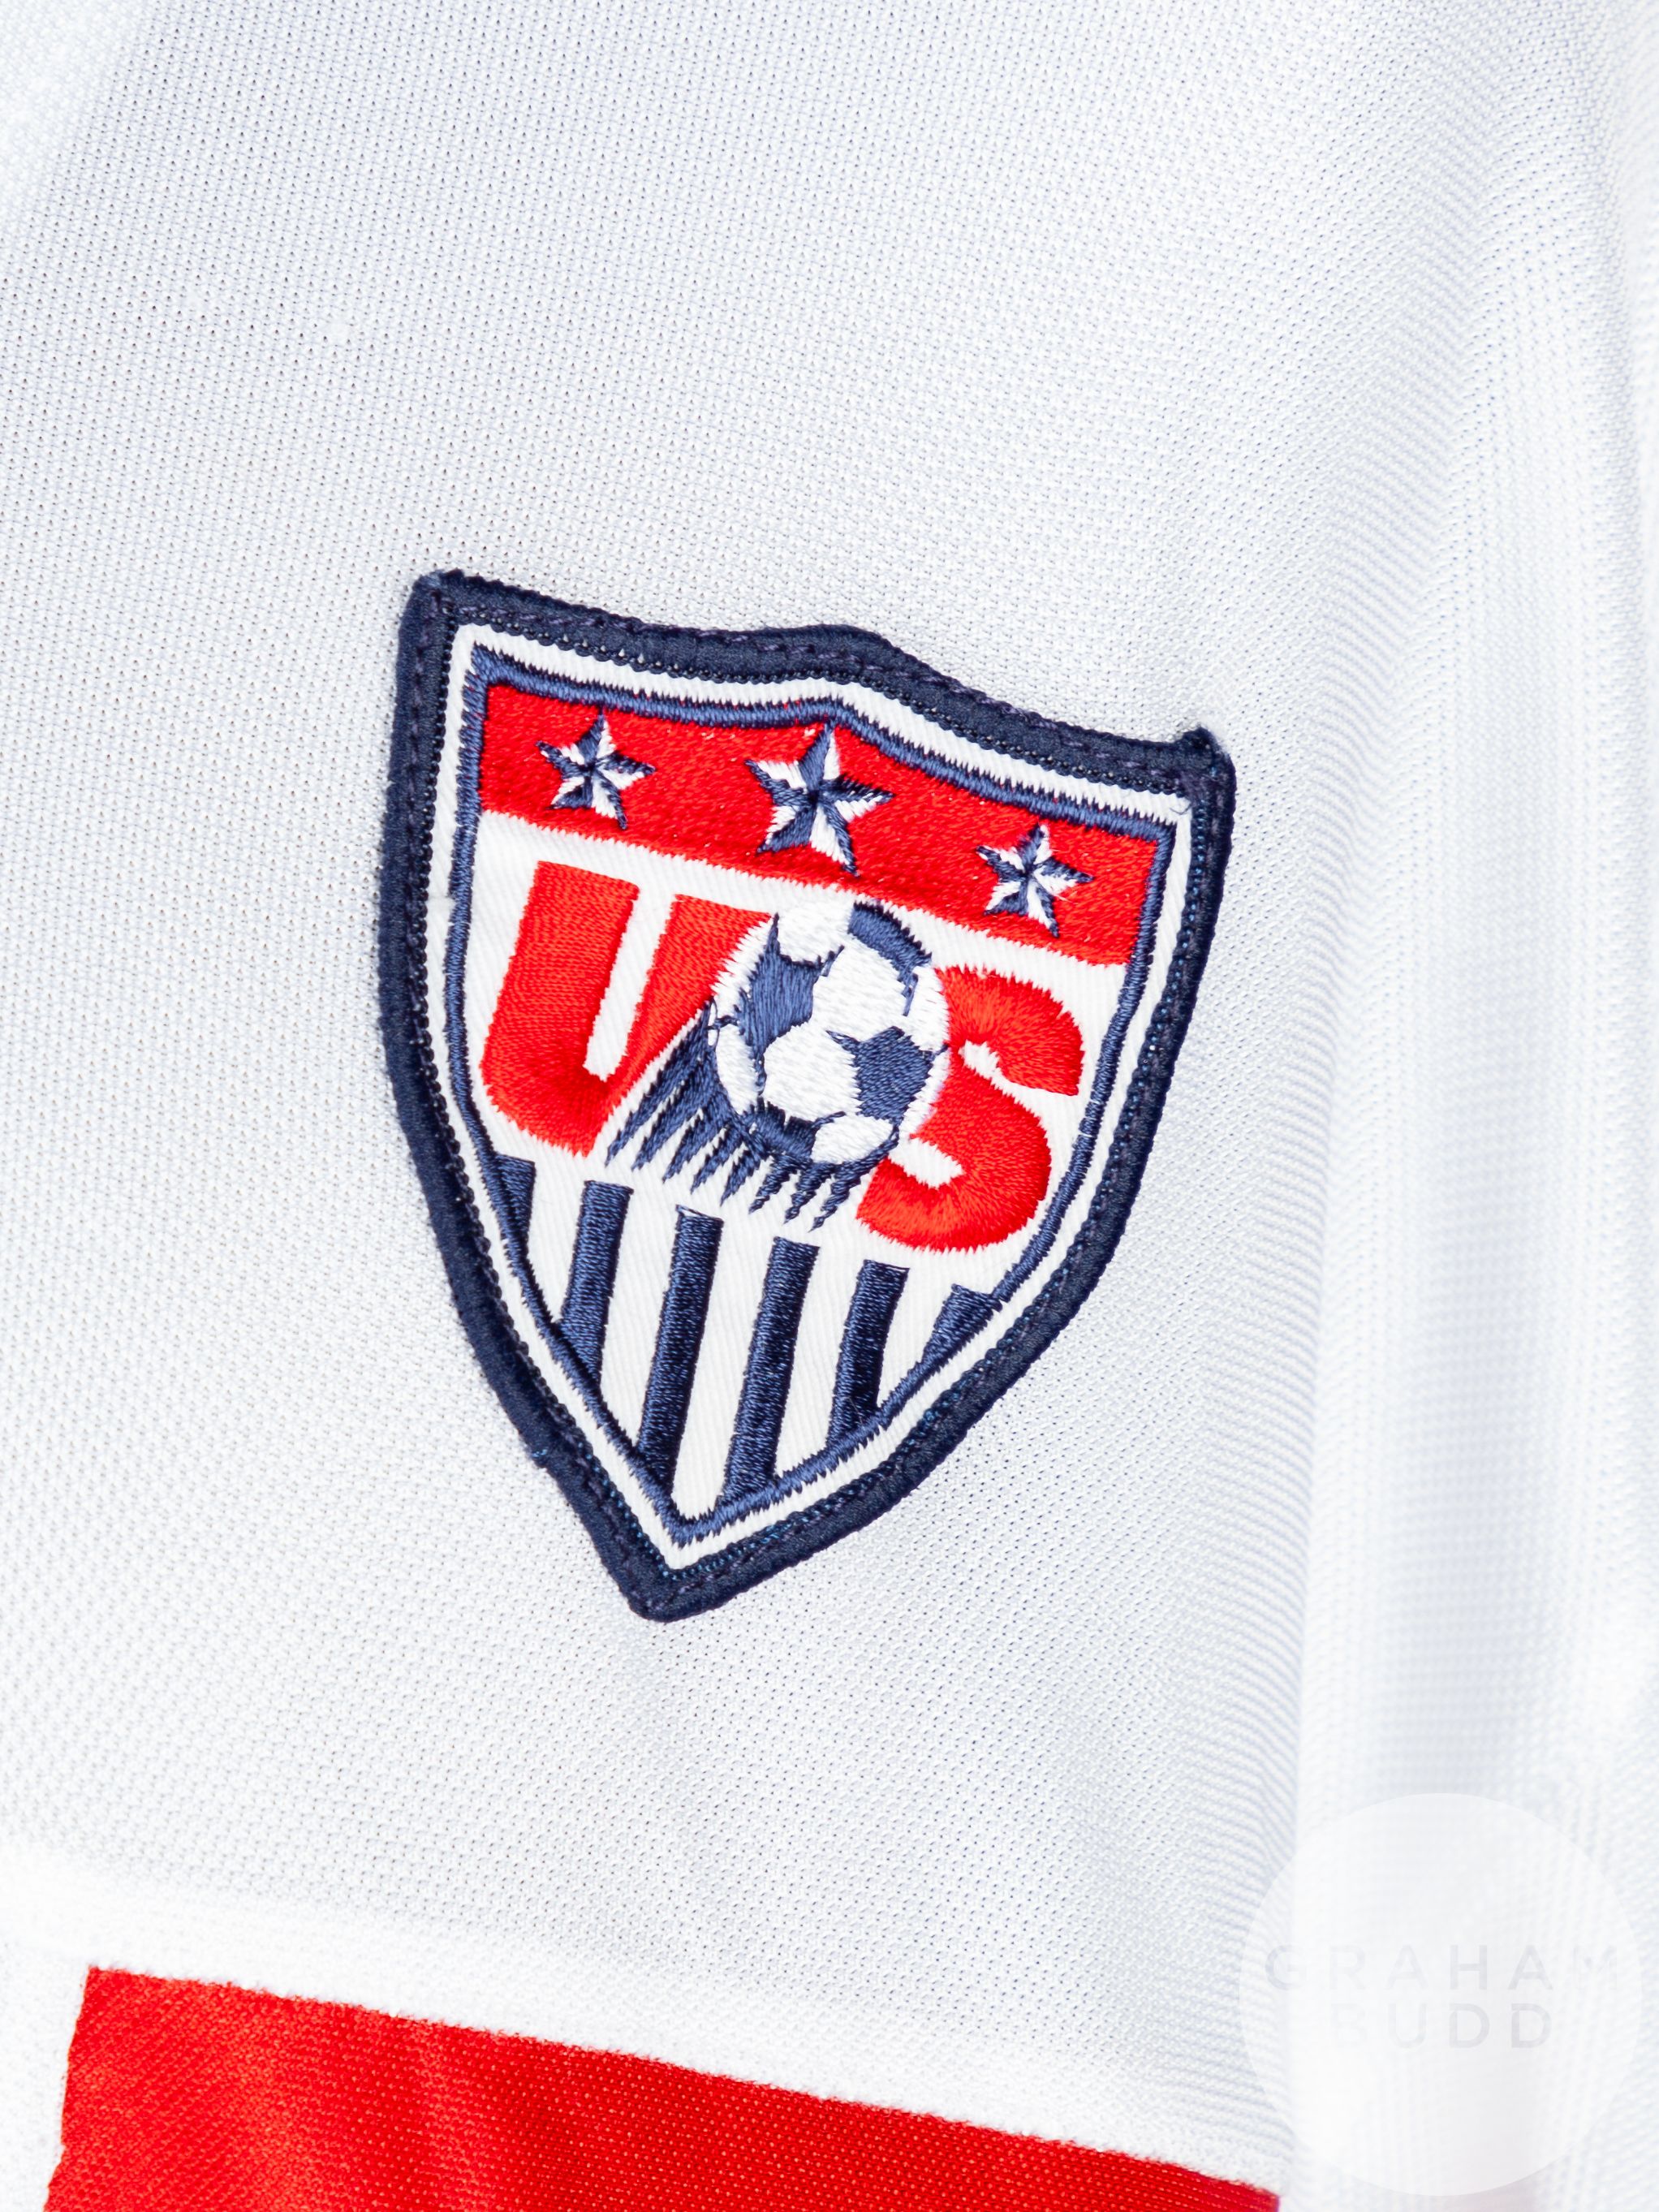 Mike Burns white, blue and red No.4 USA v. Scotland match issued long-sleeved shirt - Image 3 of 5